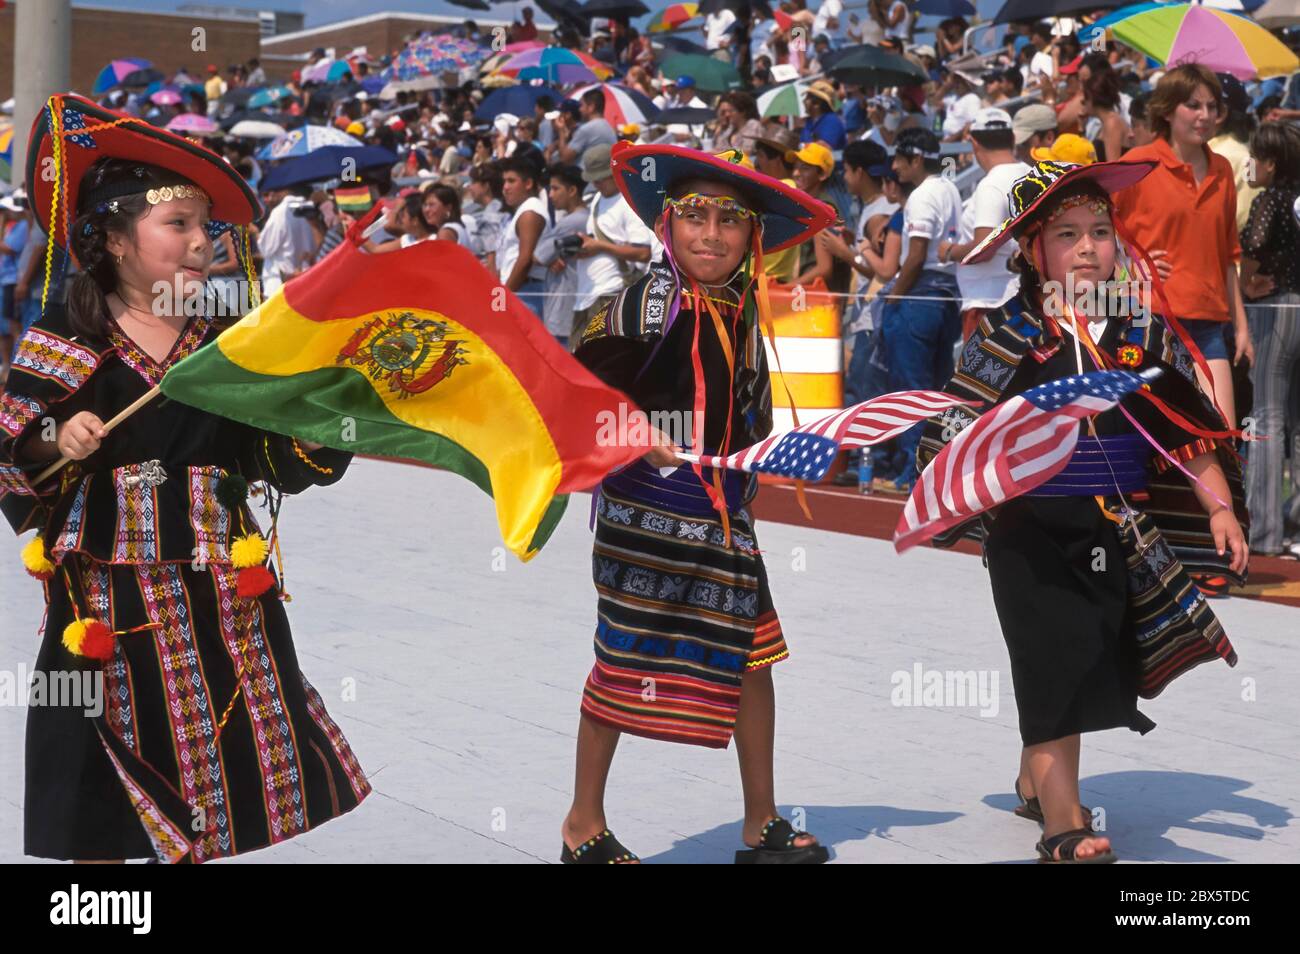 FALLS CHURCH, VIRGINIA, USA, AUGUST 2002 - Young Bolivian girls in costume dancing with flags during Bolivian Folklore festival parade. Stock Photo